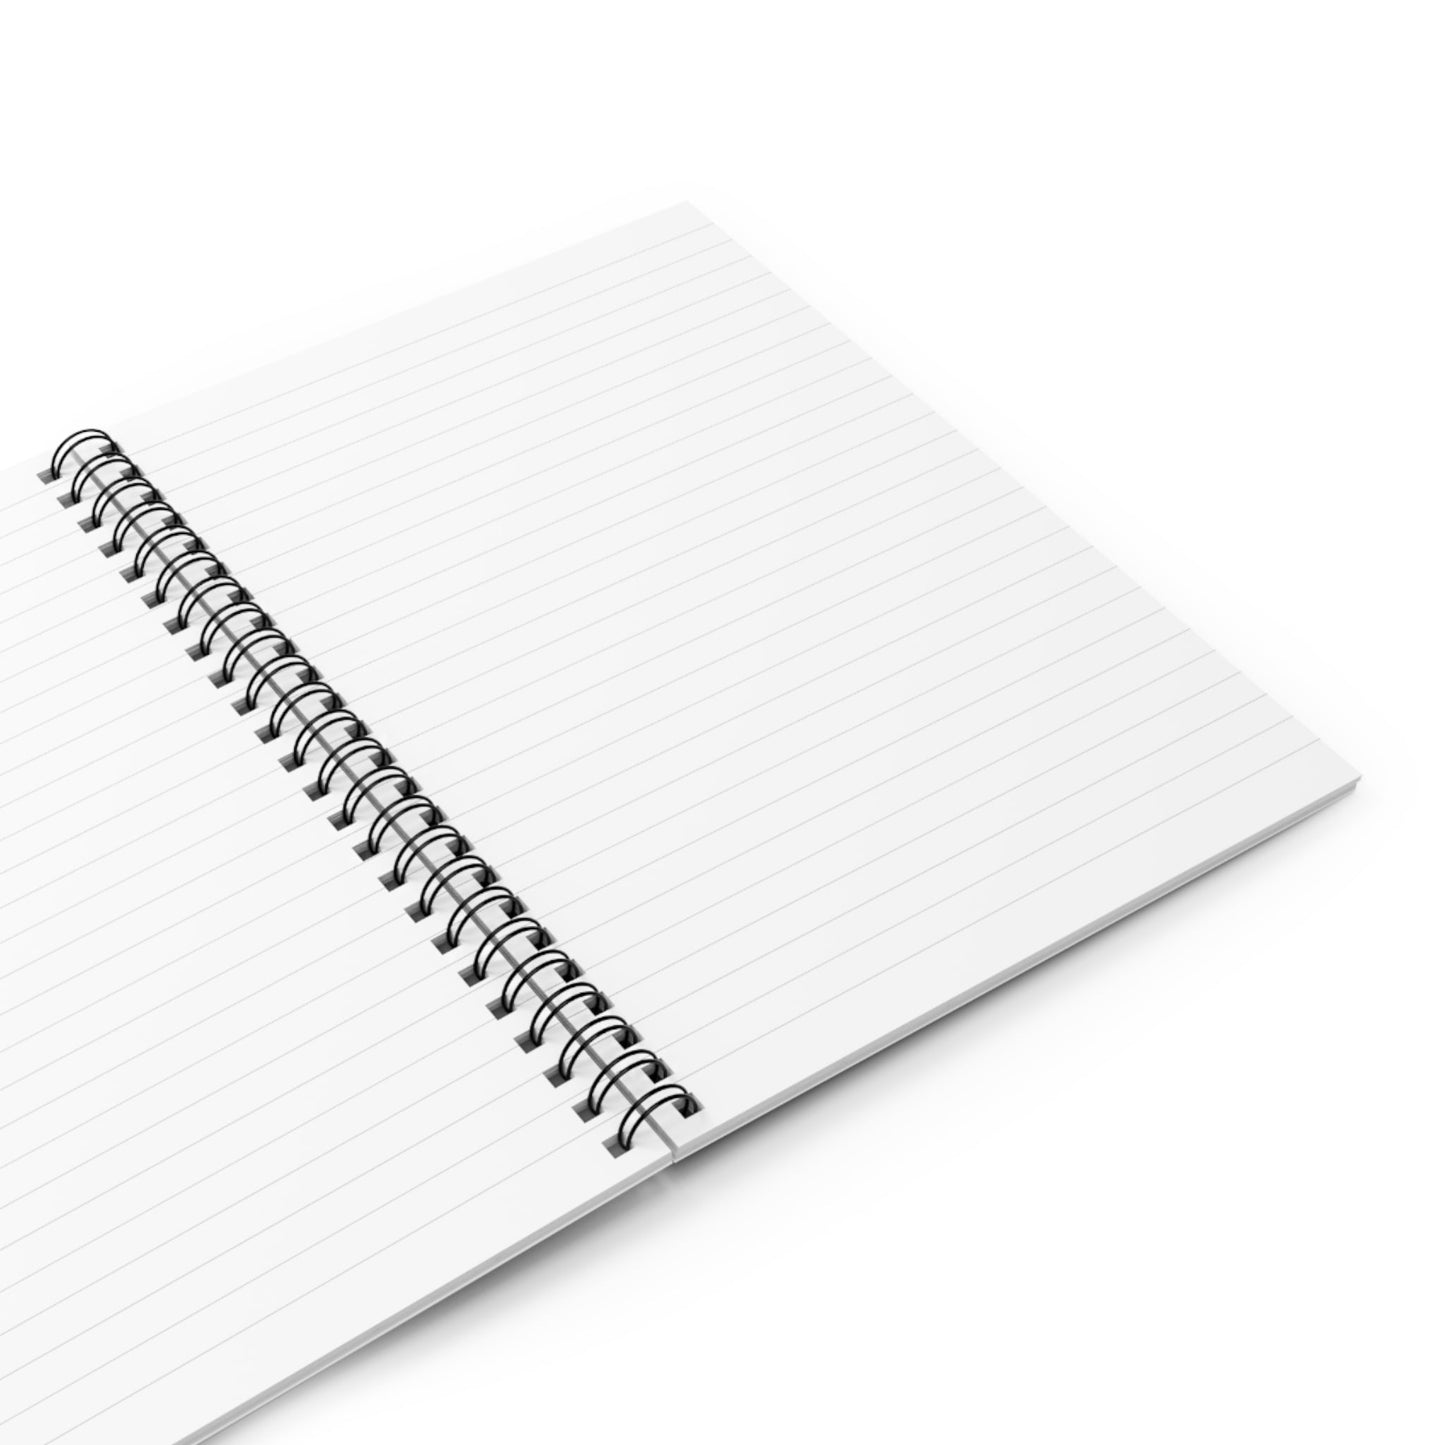 Spiral Notebook with Behind the Curtain Cover Opened with Blank White College Ruled Pages